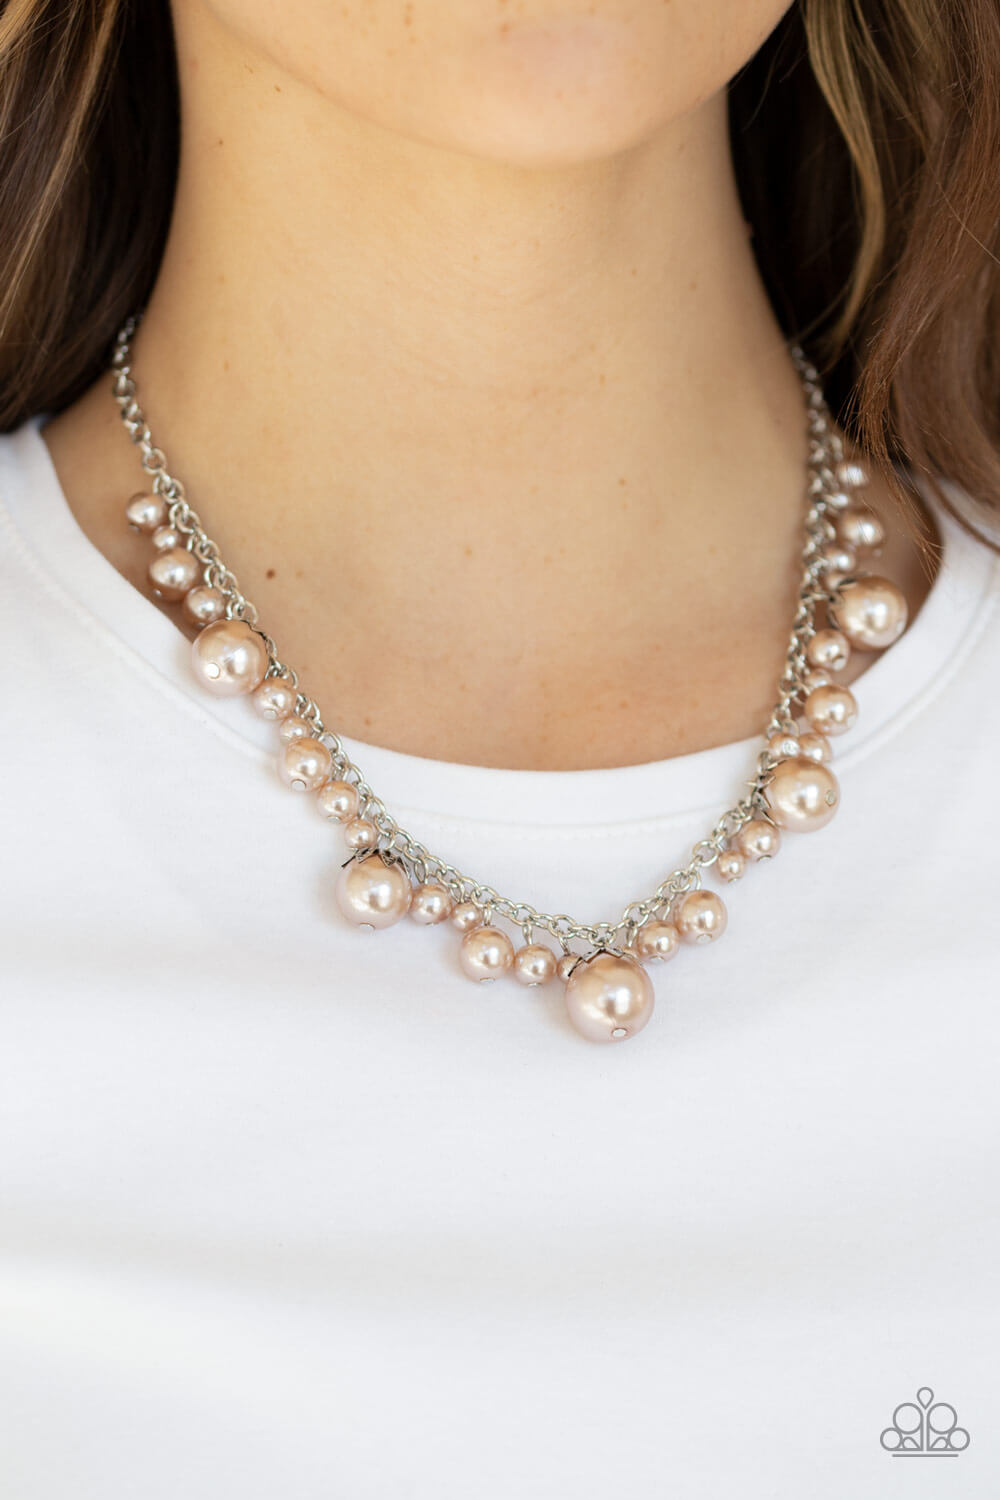 Uptown Pearls - Brown Necklace Set - Princess Glam Shop